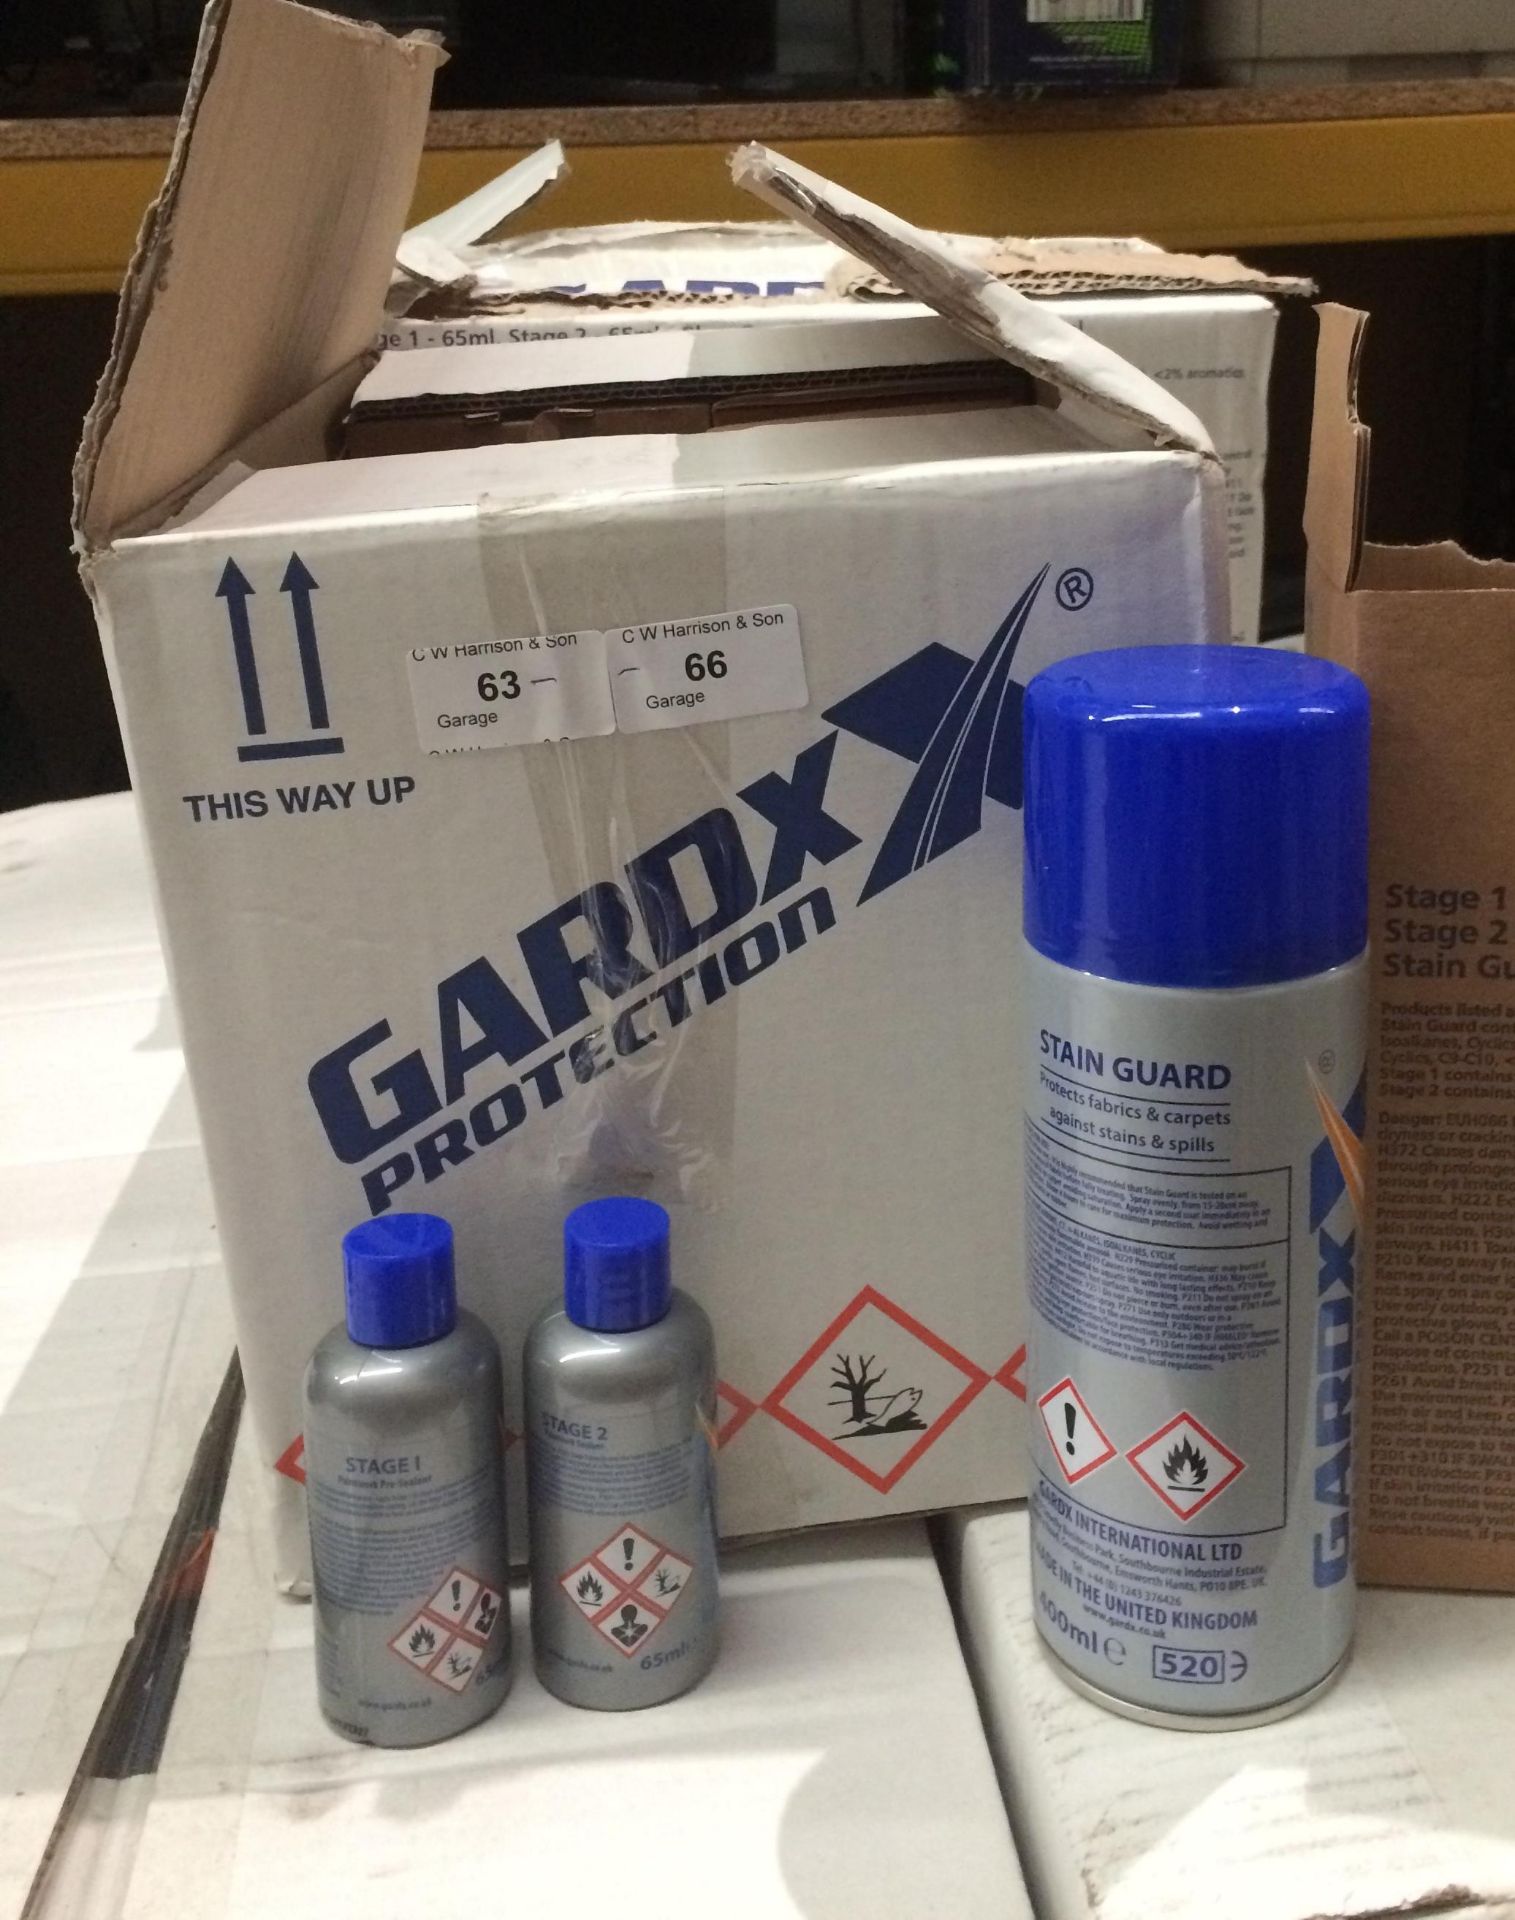 Six packs of Gardx Protection vehicle preparation packs (1 outer box) - each pack contains Stage 1